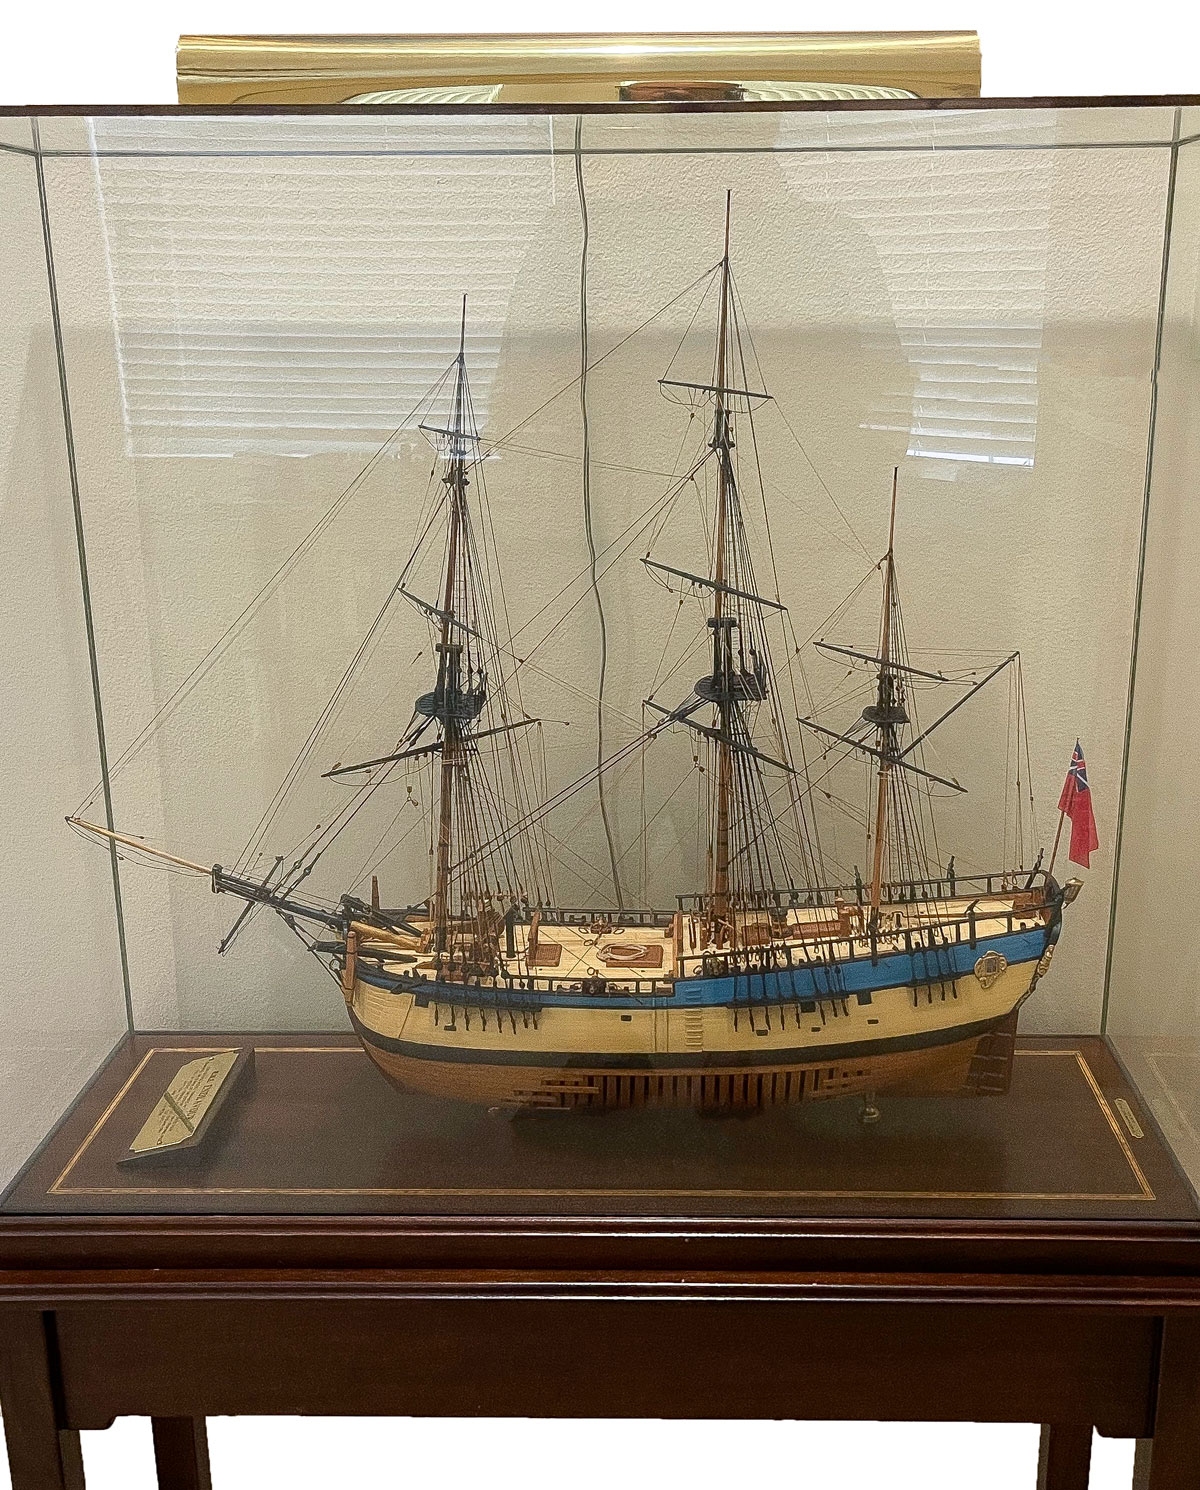 H.M.S ENDEAVOUR SHIP MODEL by HENRY